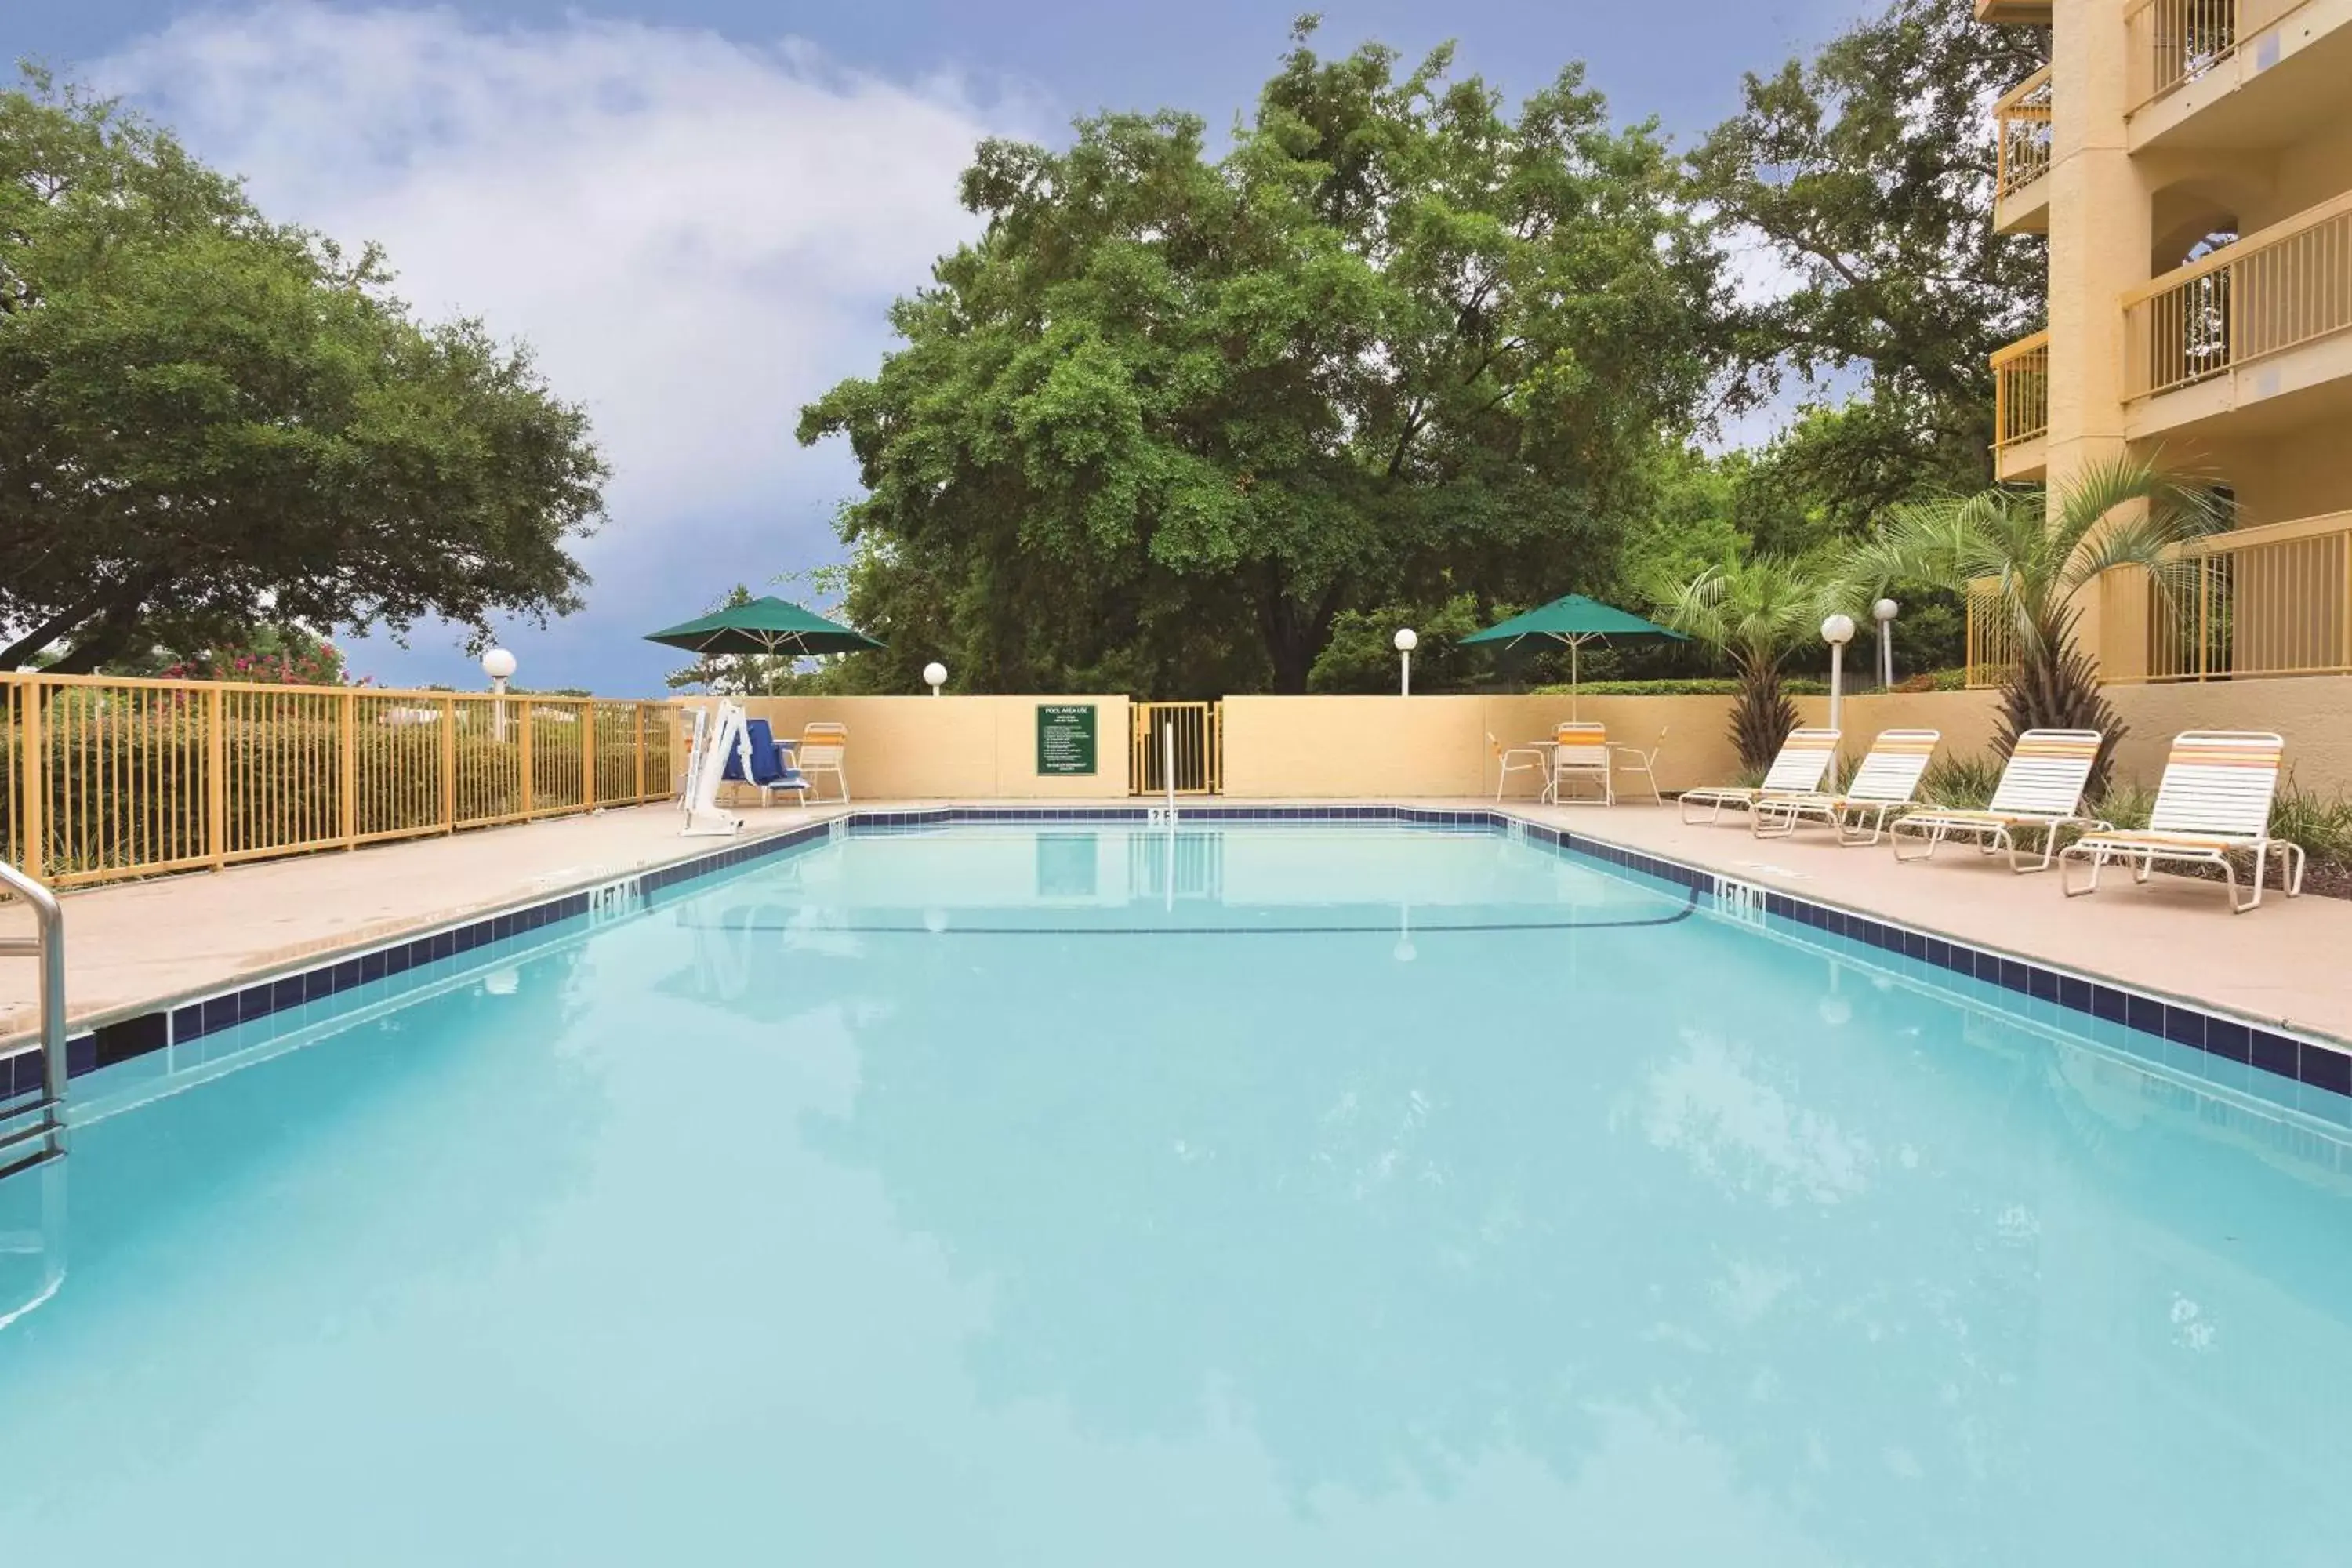 On site, Swimming Pool in Days Inn by Wyndham Gainesville Florida